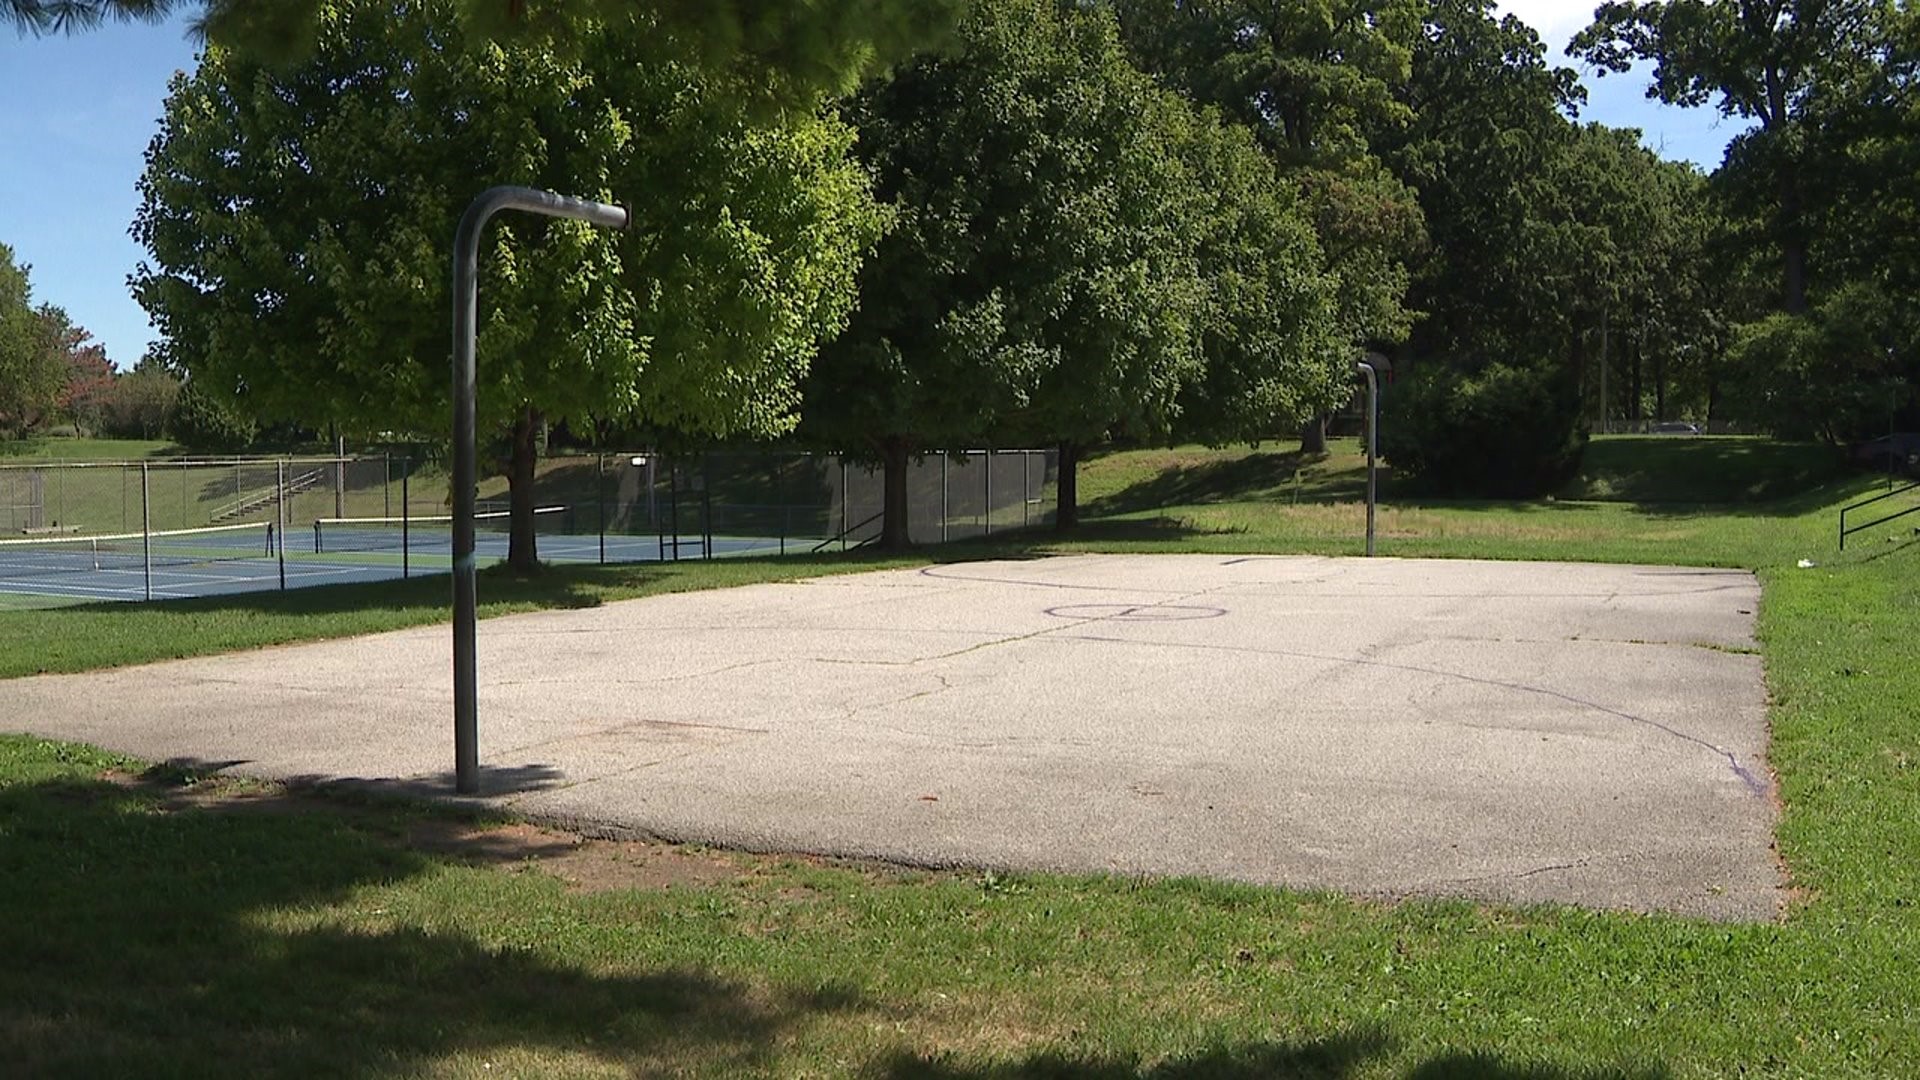 Hoops taken apart at Rock Island part to help curb crime